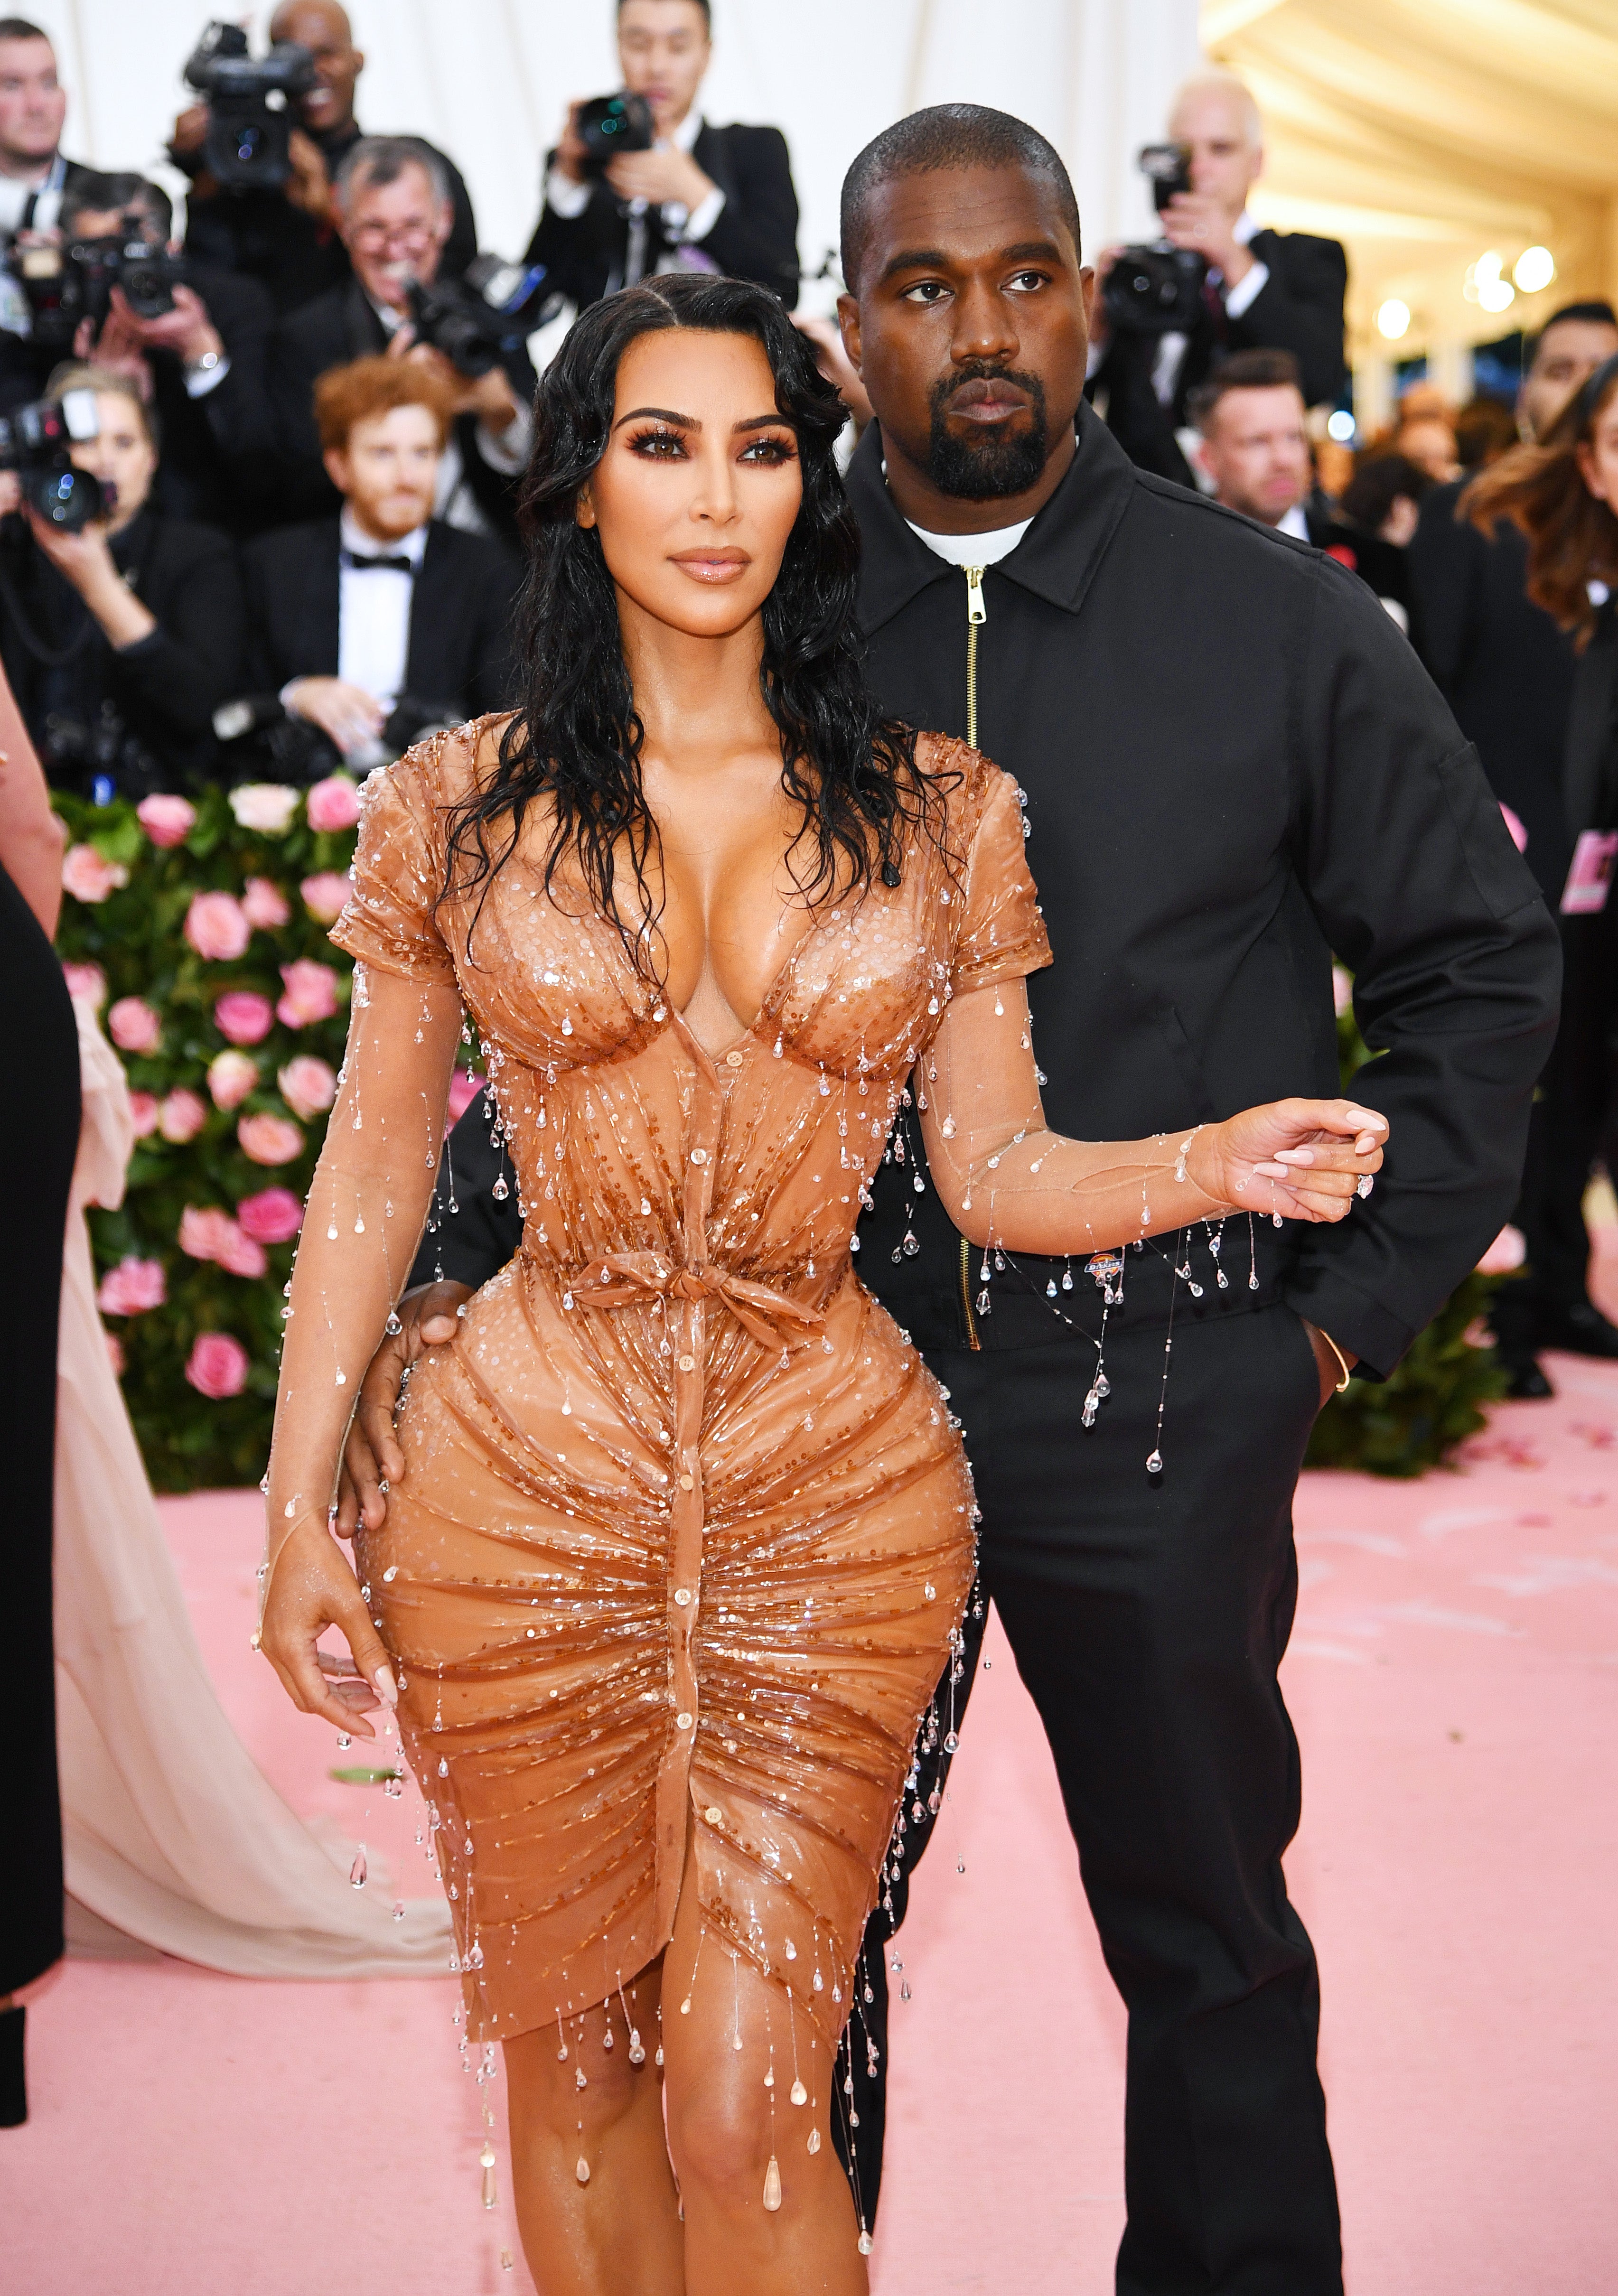 Kim Kardashian West and Kanye West attend the 2019 Met Gala